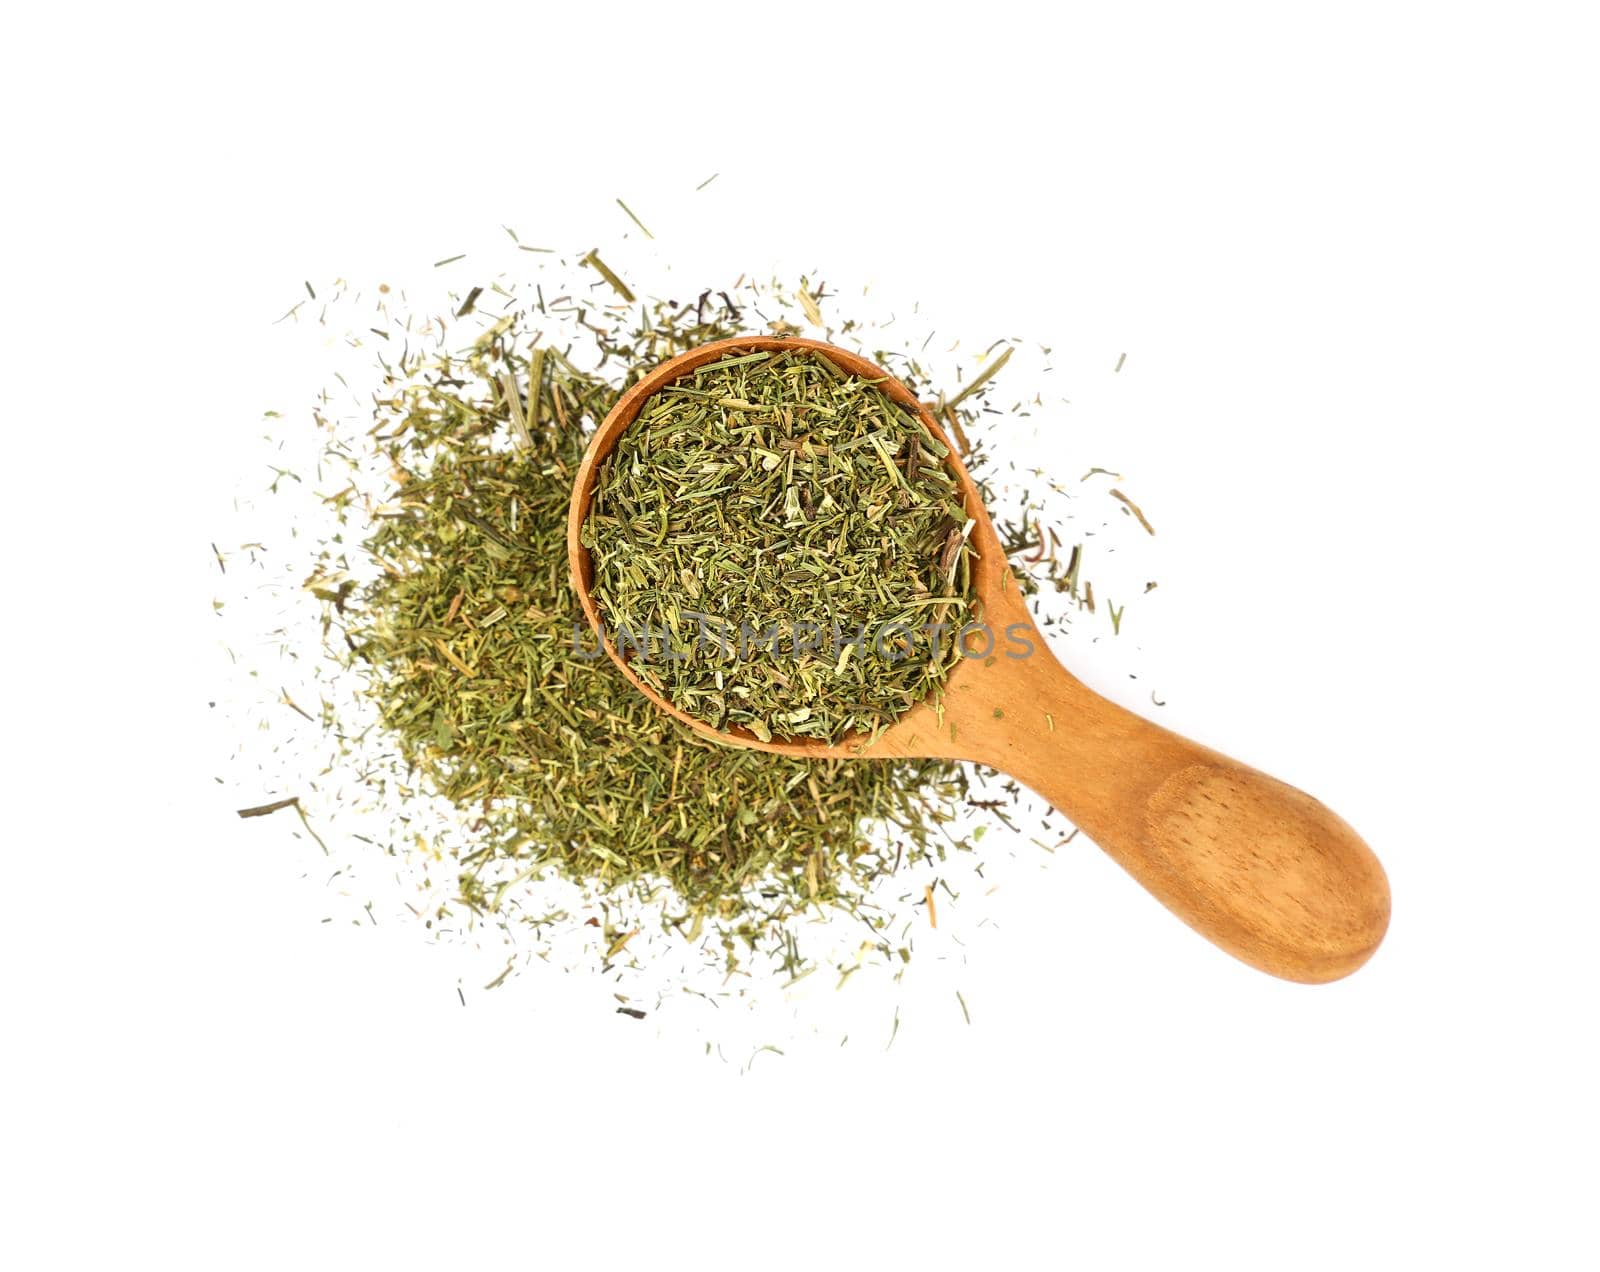 Close up one wooden scoop spoon full of green dried herbs spilled and spread around, dill or marjoram isolated on white background, elevated top view, directly above